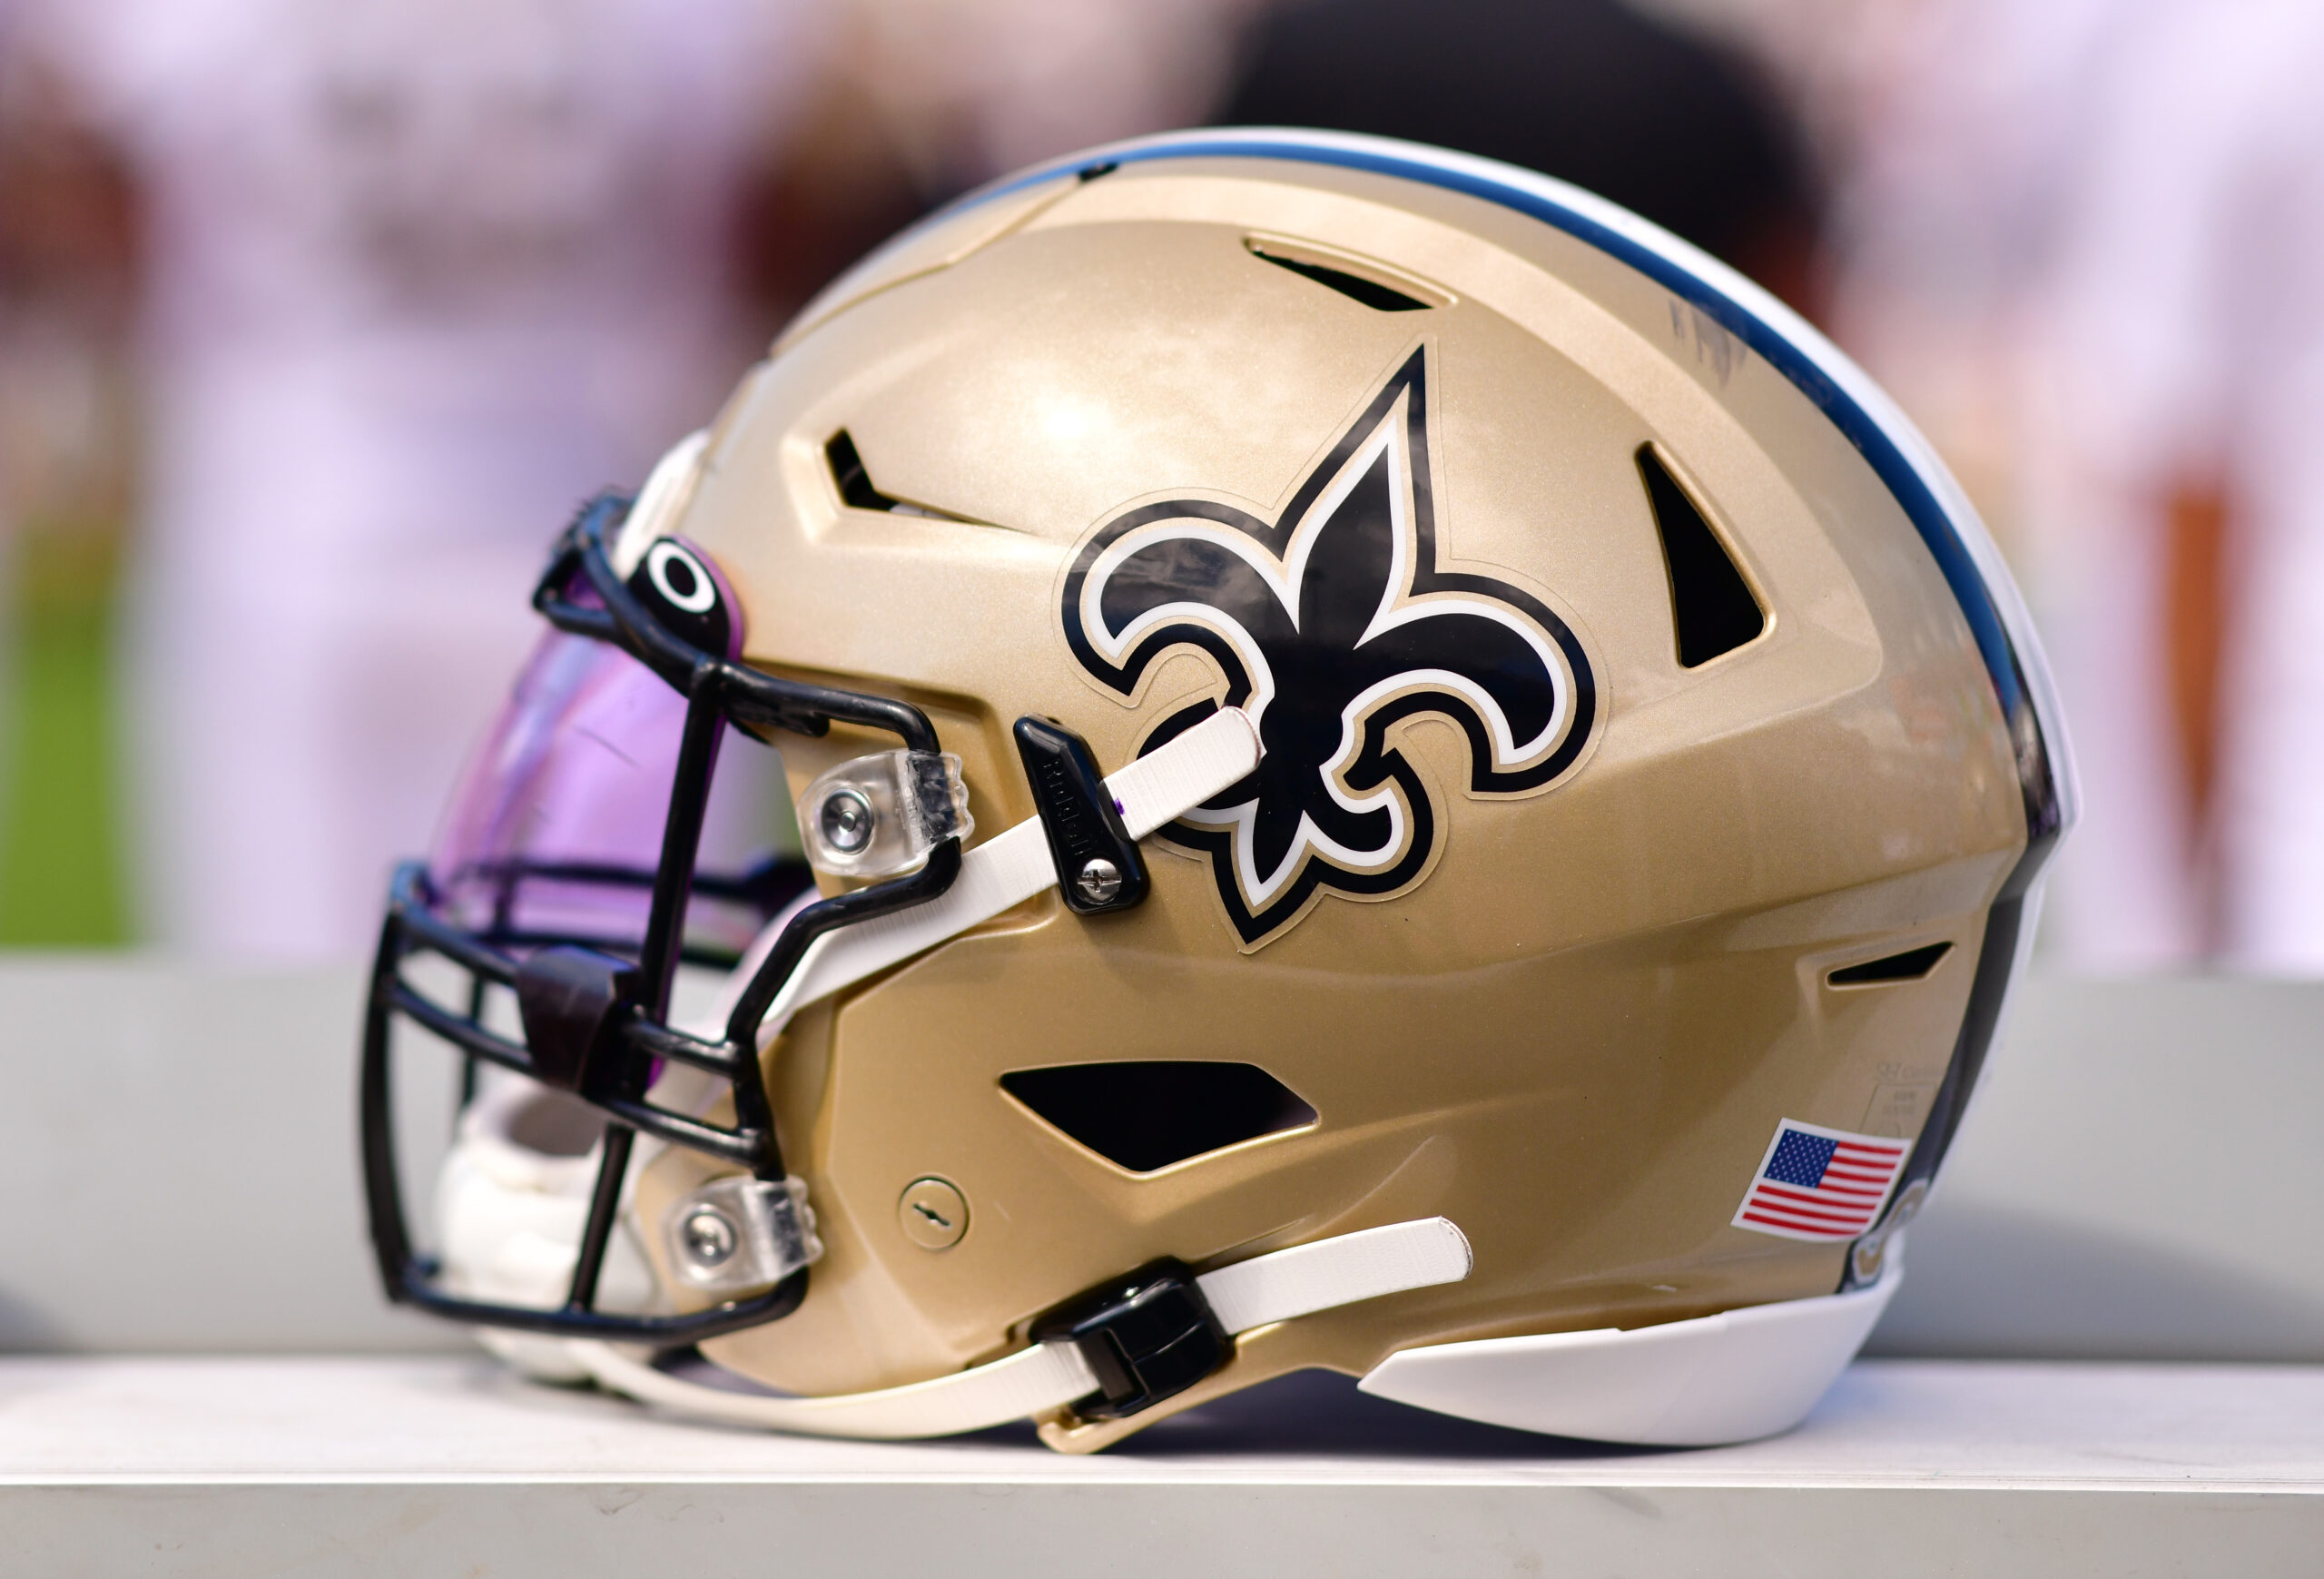 Every move the Saints have made so far this offseason